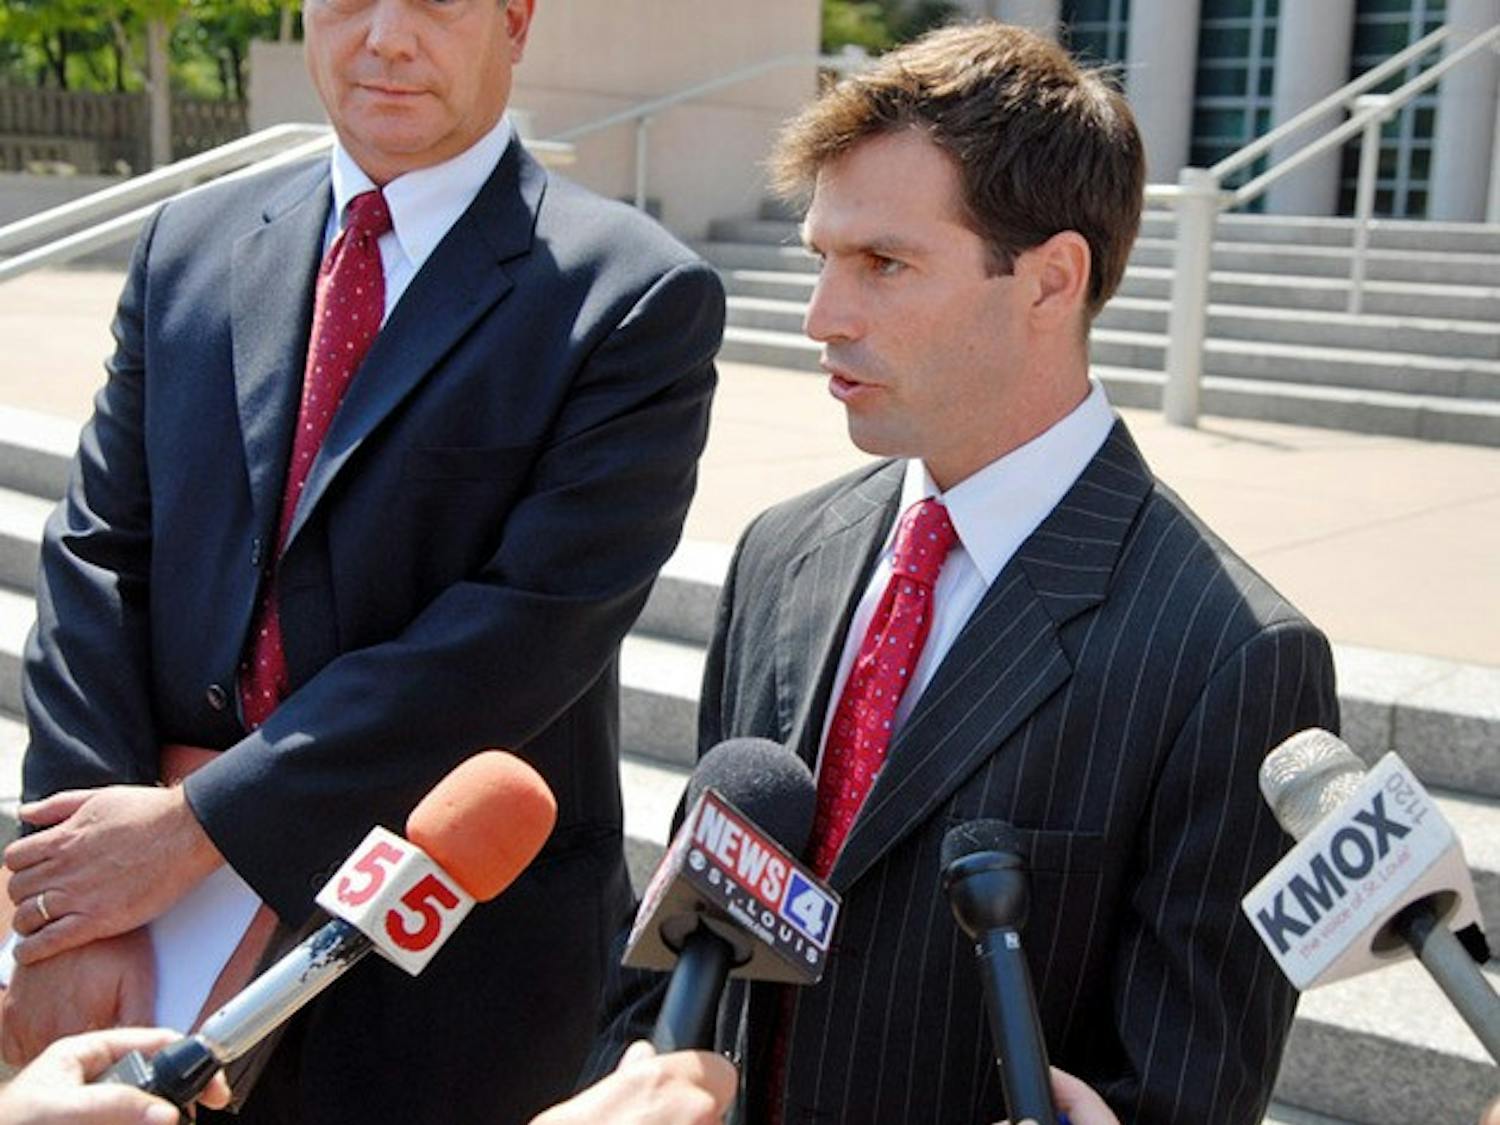 Former Missouri State Senator Jeff Smith (center), 37, speaks with members of the media on the steps of the Thomas F. Eagleton United States Courthouse in St. Louis Tuesday, Aug. 25, 2009. Smith plead guilty to two counts of conspiracy to obstruct justice in relationship to an investigation of his losing 2004 run for Congress. Smith resigned his seat in the state senate today. At left is attorney Richard Greenberg. (AP PHOTO/Sid Hastings)
BC-MO--Lawmakers-Investigation